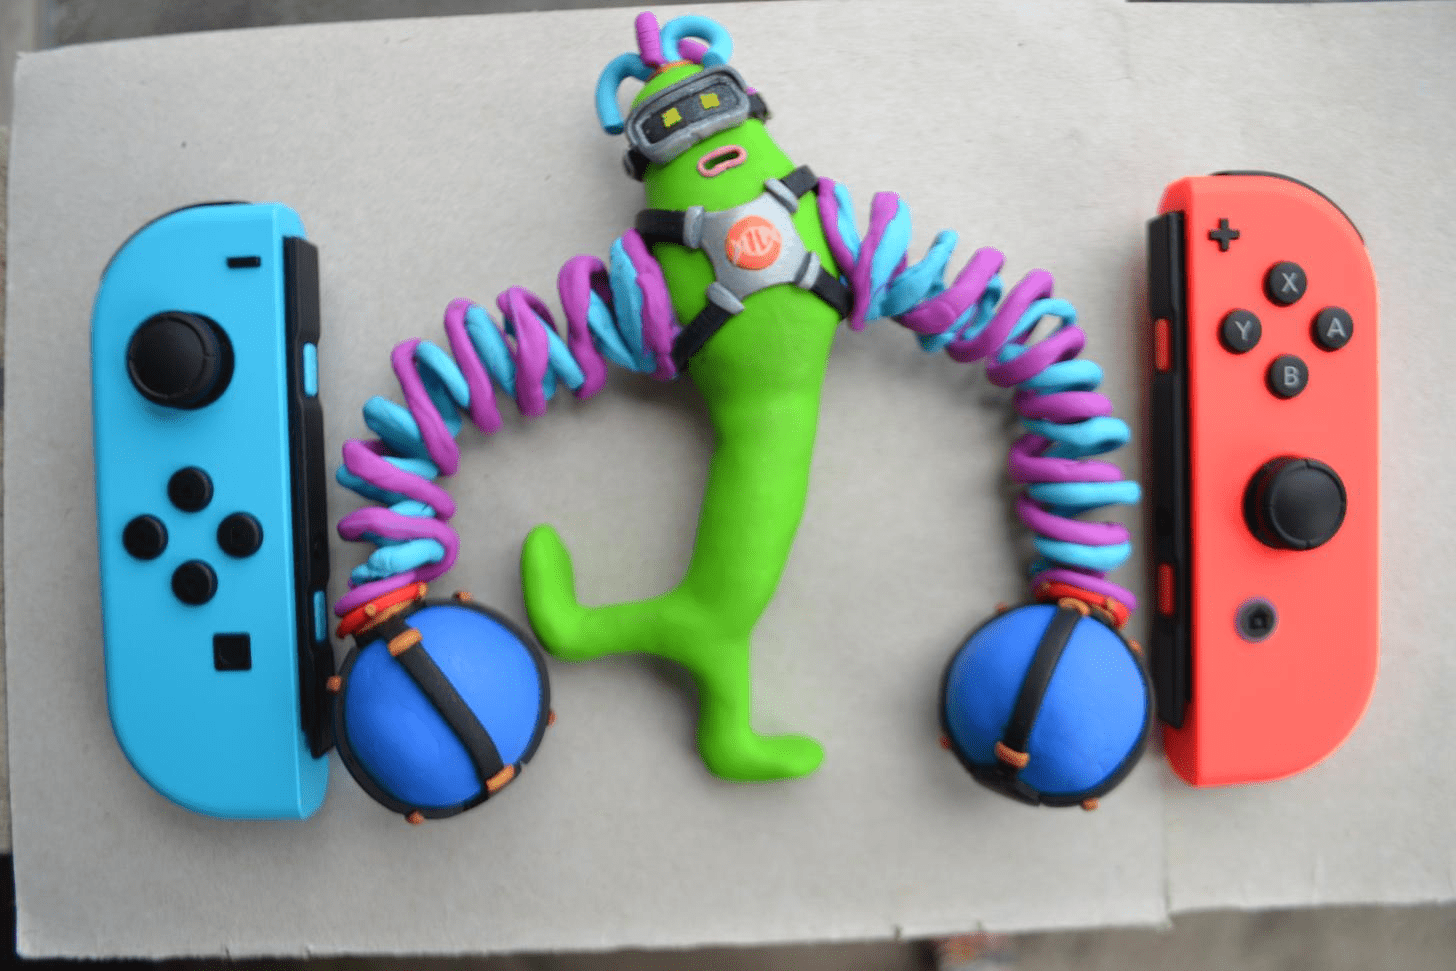 Arms’ Helix Is Even More Unnerving In Clay Form